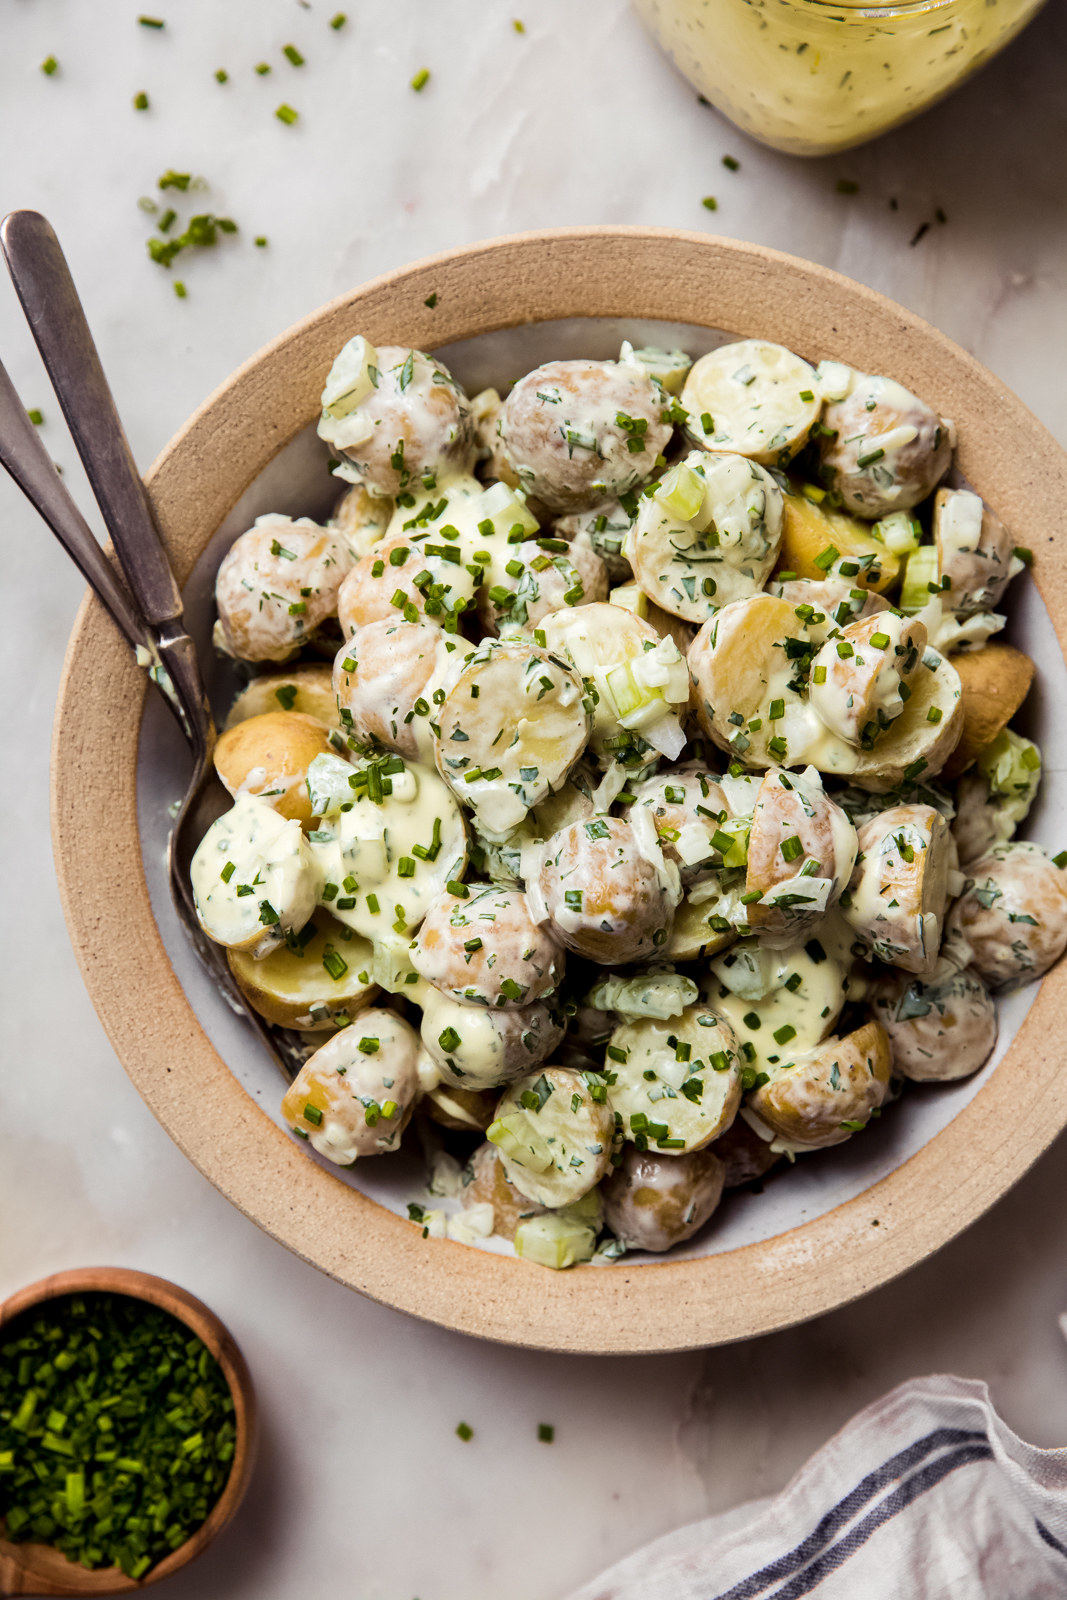 Potato salad with chives.